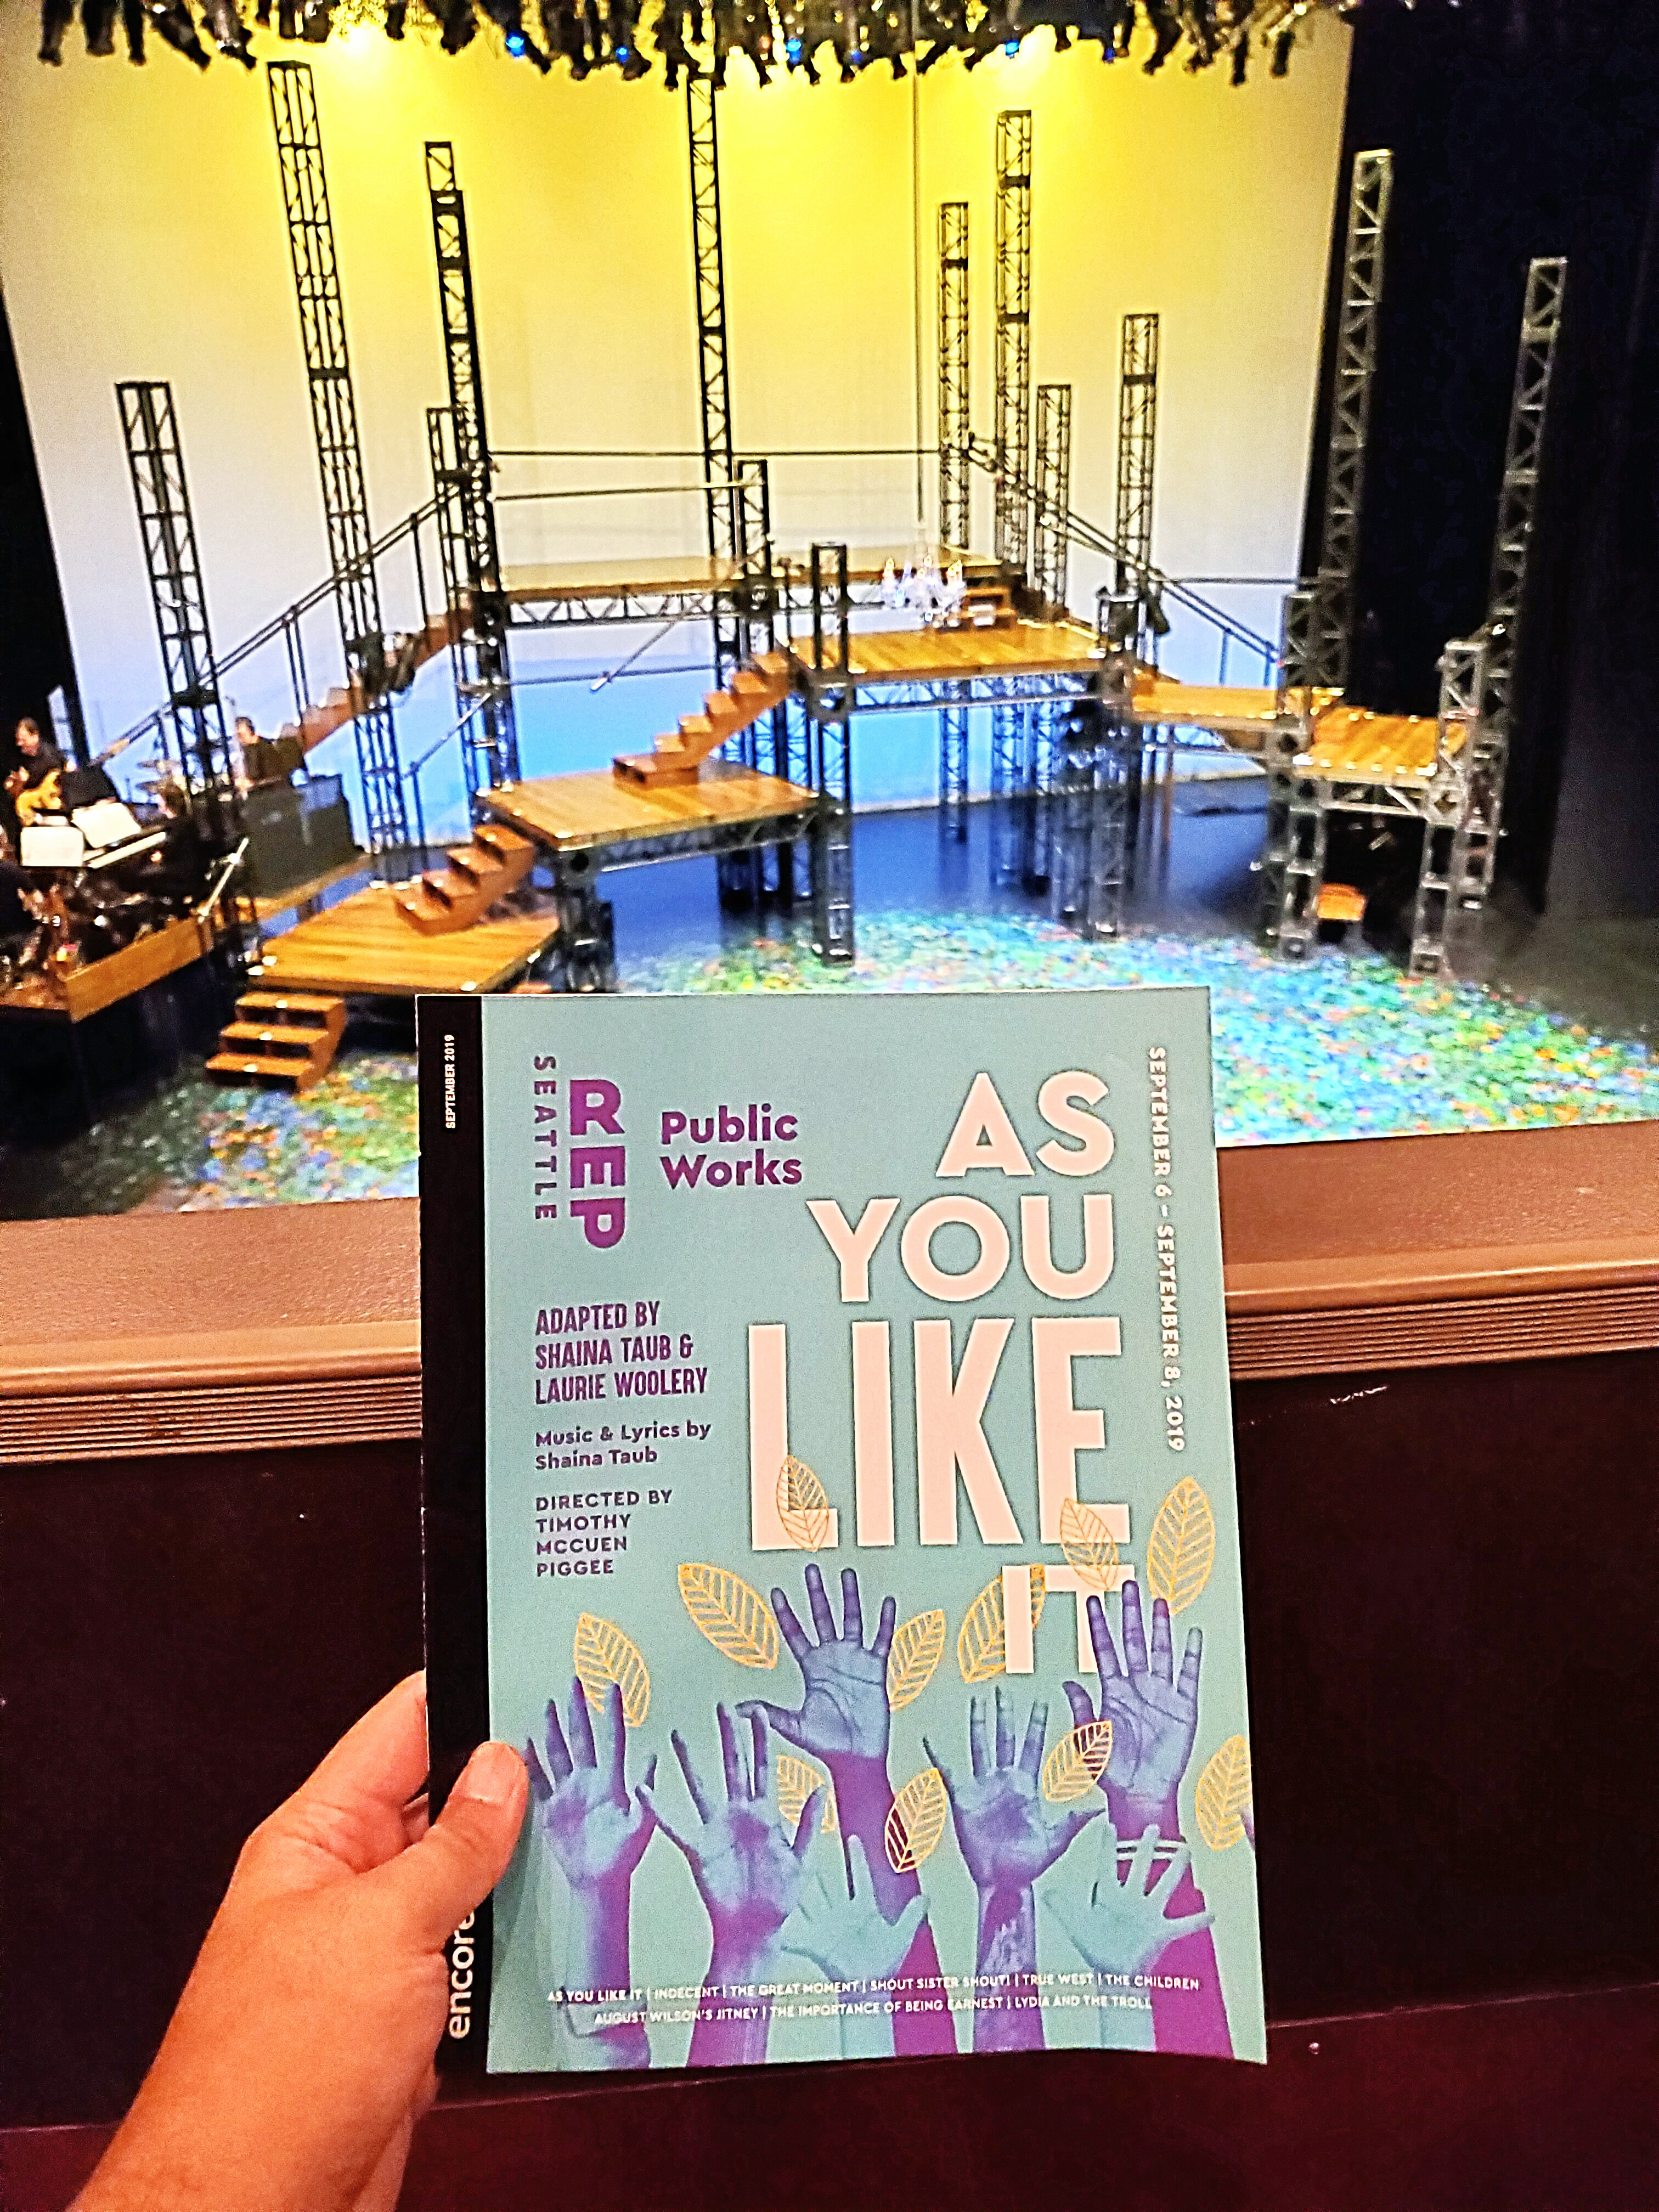 #AsYouLikeIt #musical w/ Seattle Rep. #Cute adaptation of the #Shakespeare #comedy. Lightning cut the lights/sound midshow & an audience member wandered onstage! #technicalDifficulties